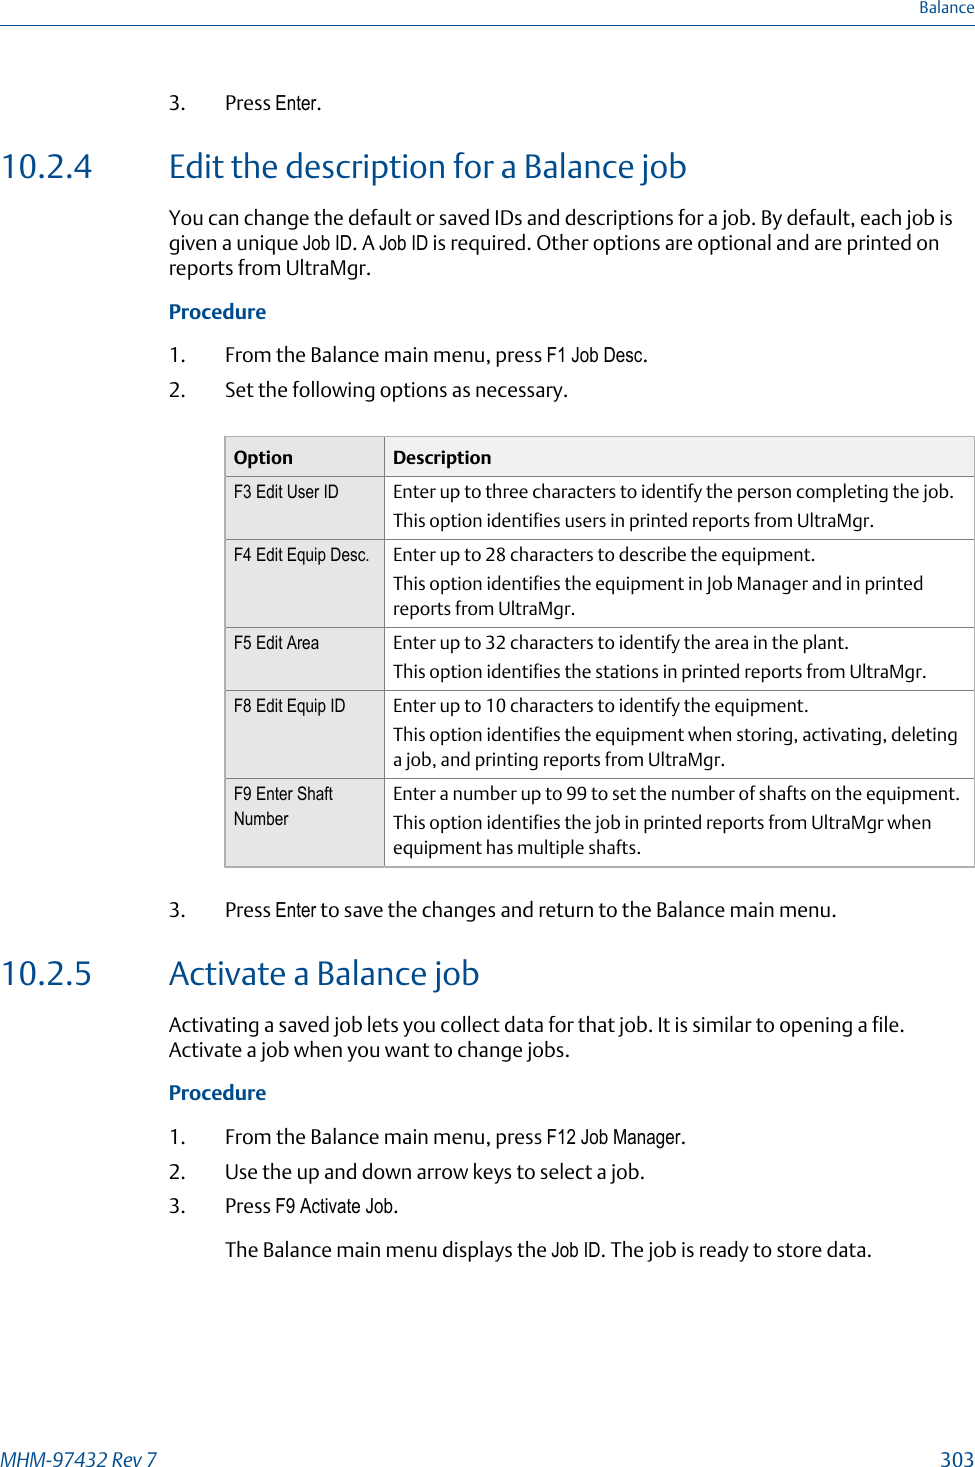 3. Press Enter.10.2.4 Edit the description for a Balance jobYou can change the default or saved IDs and descriptions for a job. By default, each job isgiven a unique Job ID. A Job ID is required. Other options are optional and are printed onreports from UltraMgr.Procedure1. From the Balance main menu, press F1 Job Desc.2. Set the following options as necessary.Option DescriptionF3 Edit User ID Enter up to three characters to identify the person completing the job.This option identifies users in printed reports from UltraMgr.F4 Edit Equip Desc. Enter up to 28 characters to describe the equipment.This option identifies the equipment in Job Manager and in printedreports from UltraMgr.F5 Edit Area Enter up to 32 characters to identify the area in the plant.This option identifies the stations in printed reports from UltraMgr.F8 Edit Equip ID Enter up to 10 characters to identify the equipment.This option identifies the equipment when storing, activating, deletinga job, and printing reports from UltraMgr.F9 Enter ShaftNumberEnter a number up to 99 to set the number of shafts on the equipment.This option identifies the job in printed reports from UltraMgr whenequipment has multiple shafts.3. Press Enter to save the changes and return to the Balance main menu.10.2.5 Activate a Balance jobActivating a saved job lets you collect data for that job. It is similar to opening a file.Activate a job when you want to change jobs.Procedure1. From the Balance main menu, press F12 Job Manager.2. Use the up and down arrow keys to select a job.3. Press F9 Activate Job.The Balance main menu displays the Job ID. The job is ready to store data.BalanceMHM-97432 Rev 7  303